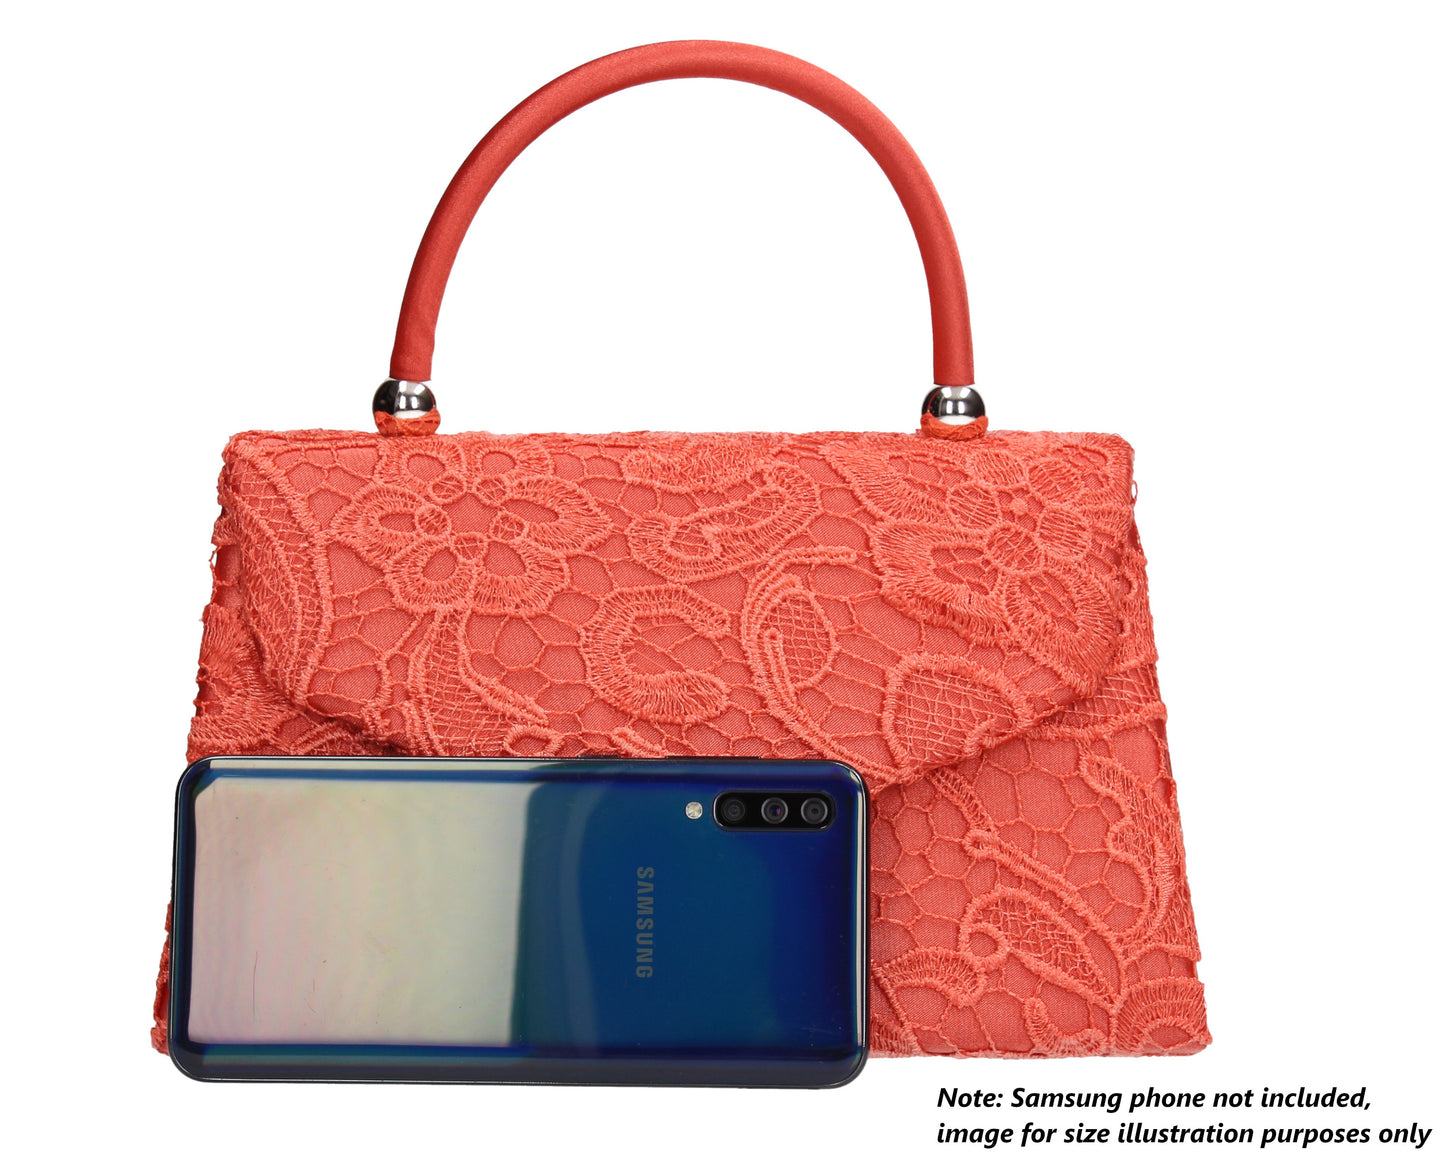 Kendall Lace Clutch Bag Coral